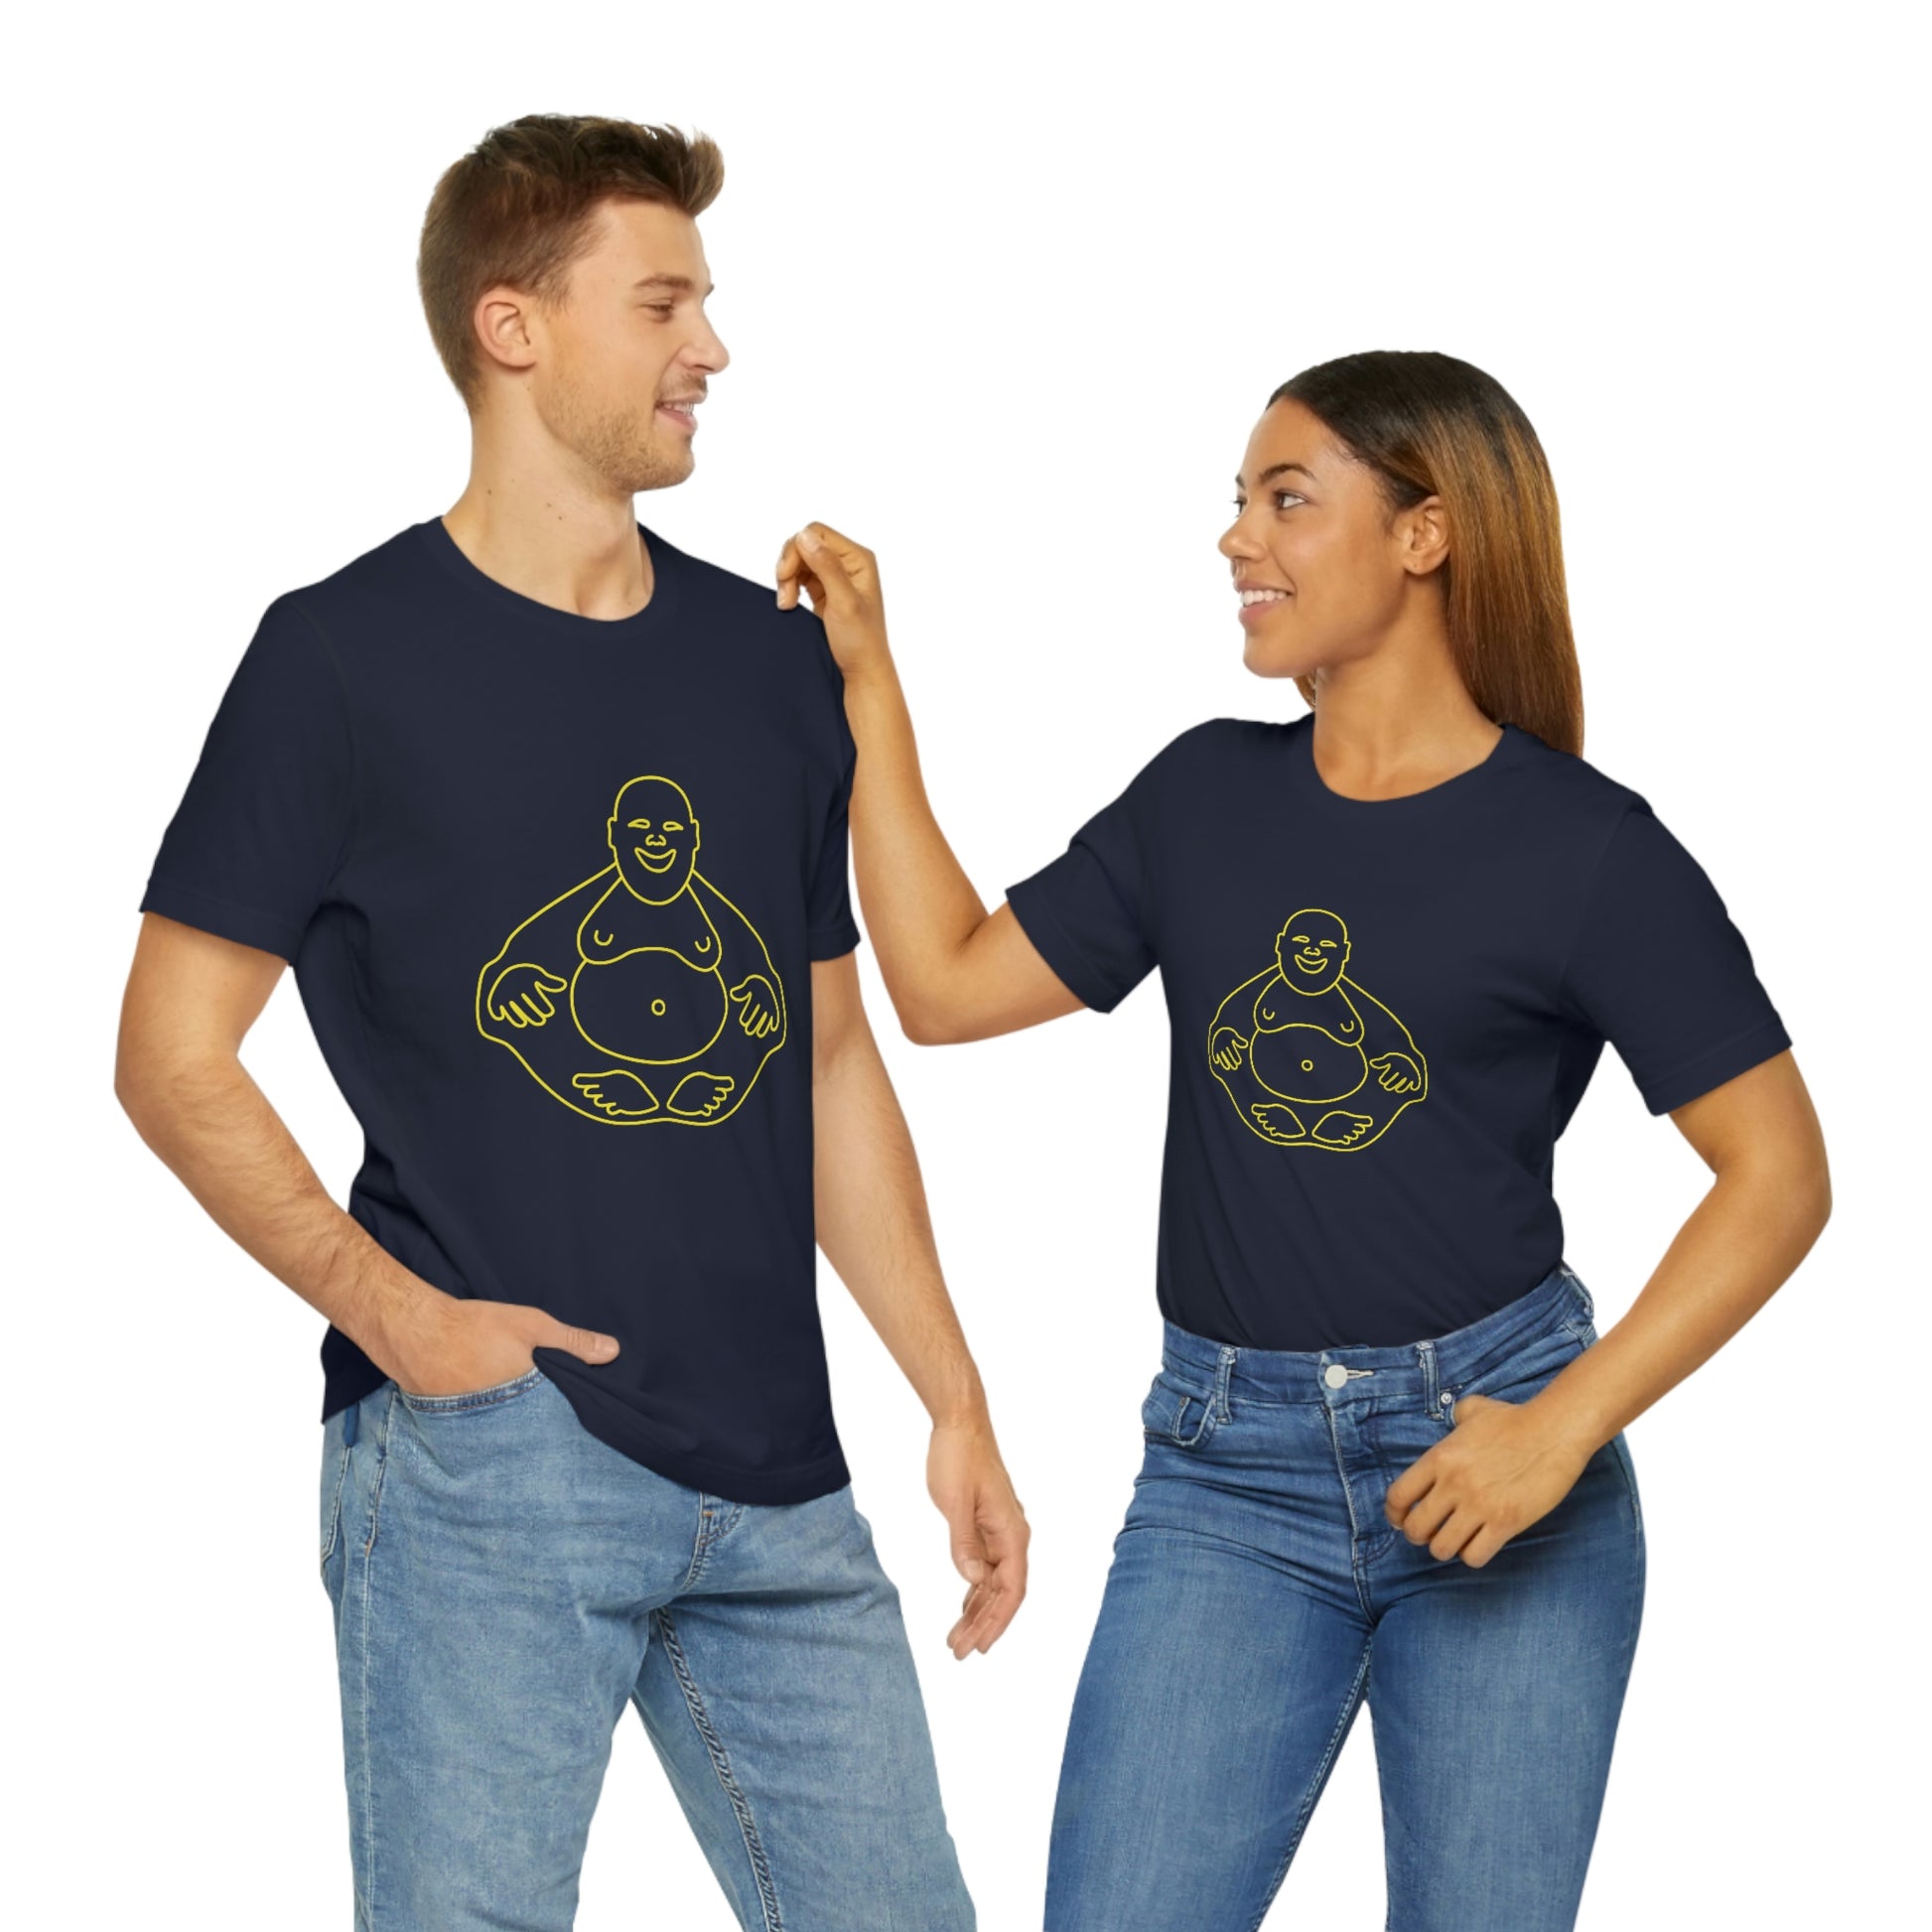 Navy T-Shirt featuring a yellow 'Laughing Buddha' design from the TEQNEON Ha Ha Land collection, exuding joy and humour